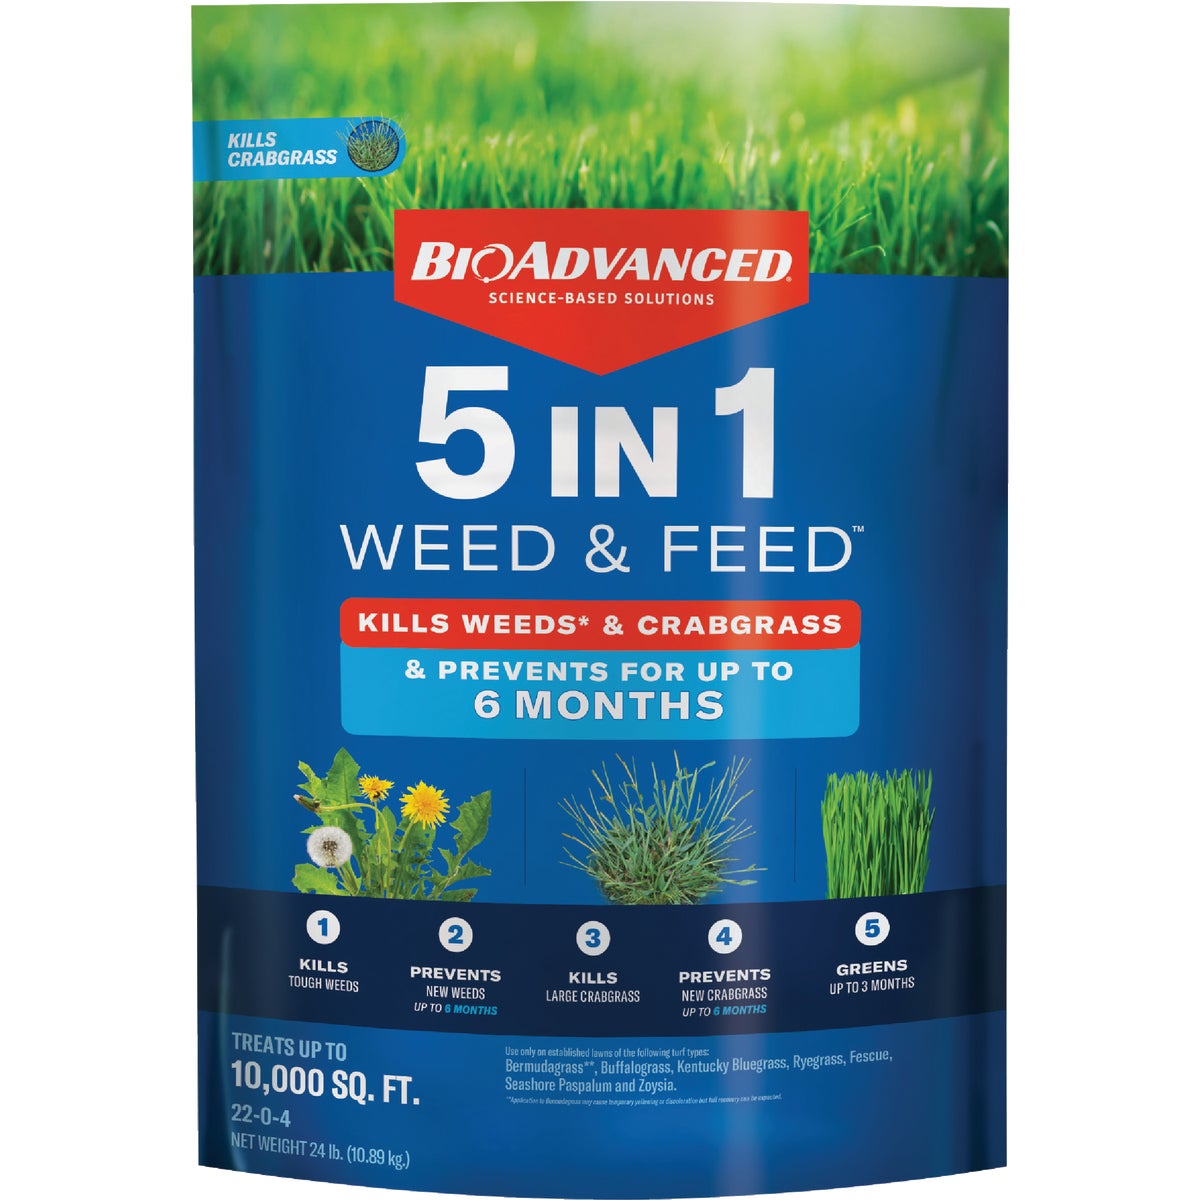 BioAdvanced 5-In-1 Weed & Feed 24 Lb. 10,000 Sq. Ft. Lawn Fertilizer with Weed Killer